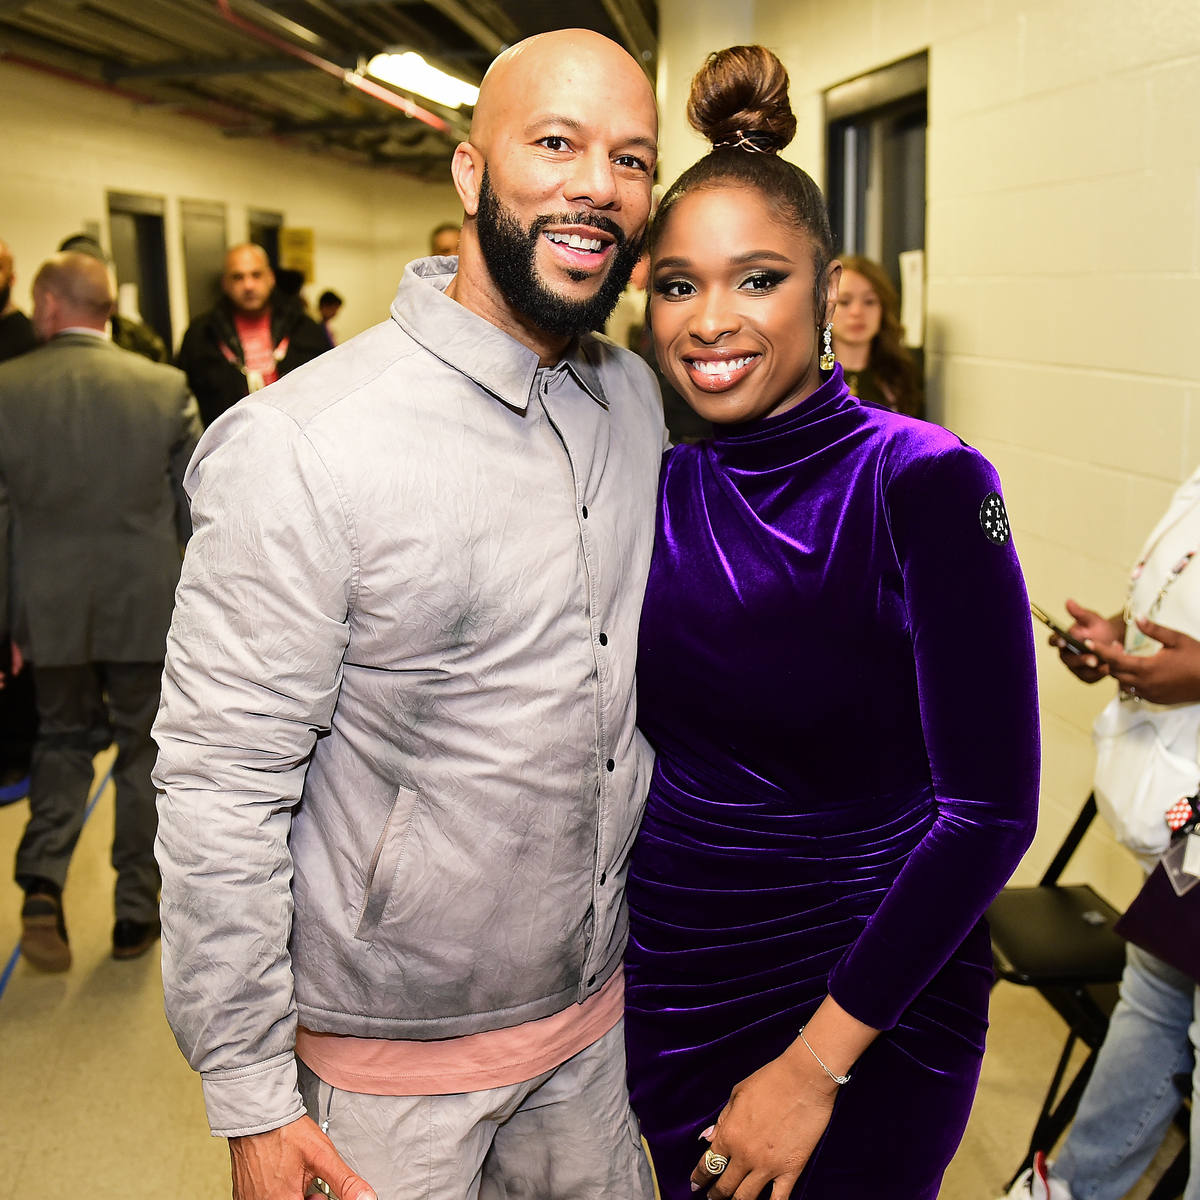 Jennifer Hudson And Common Confirm Their Romance In A Heartwarming Way